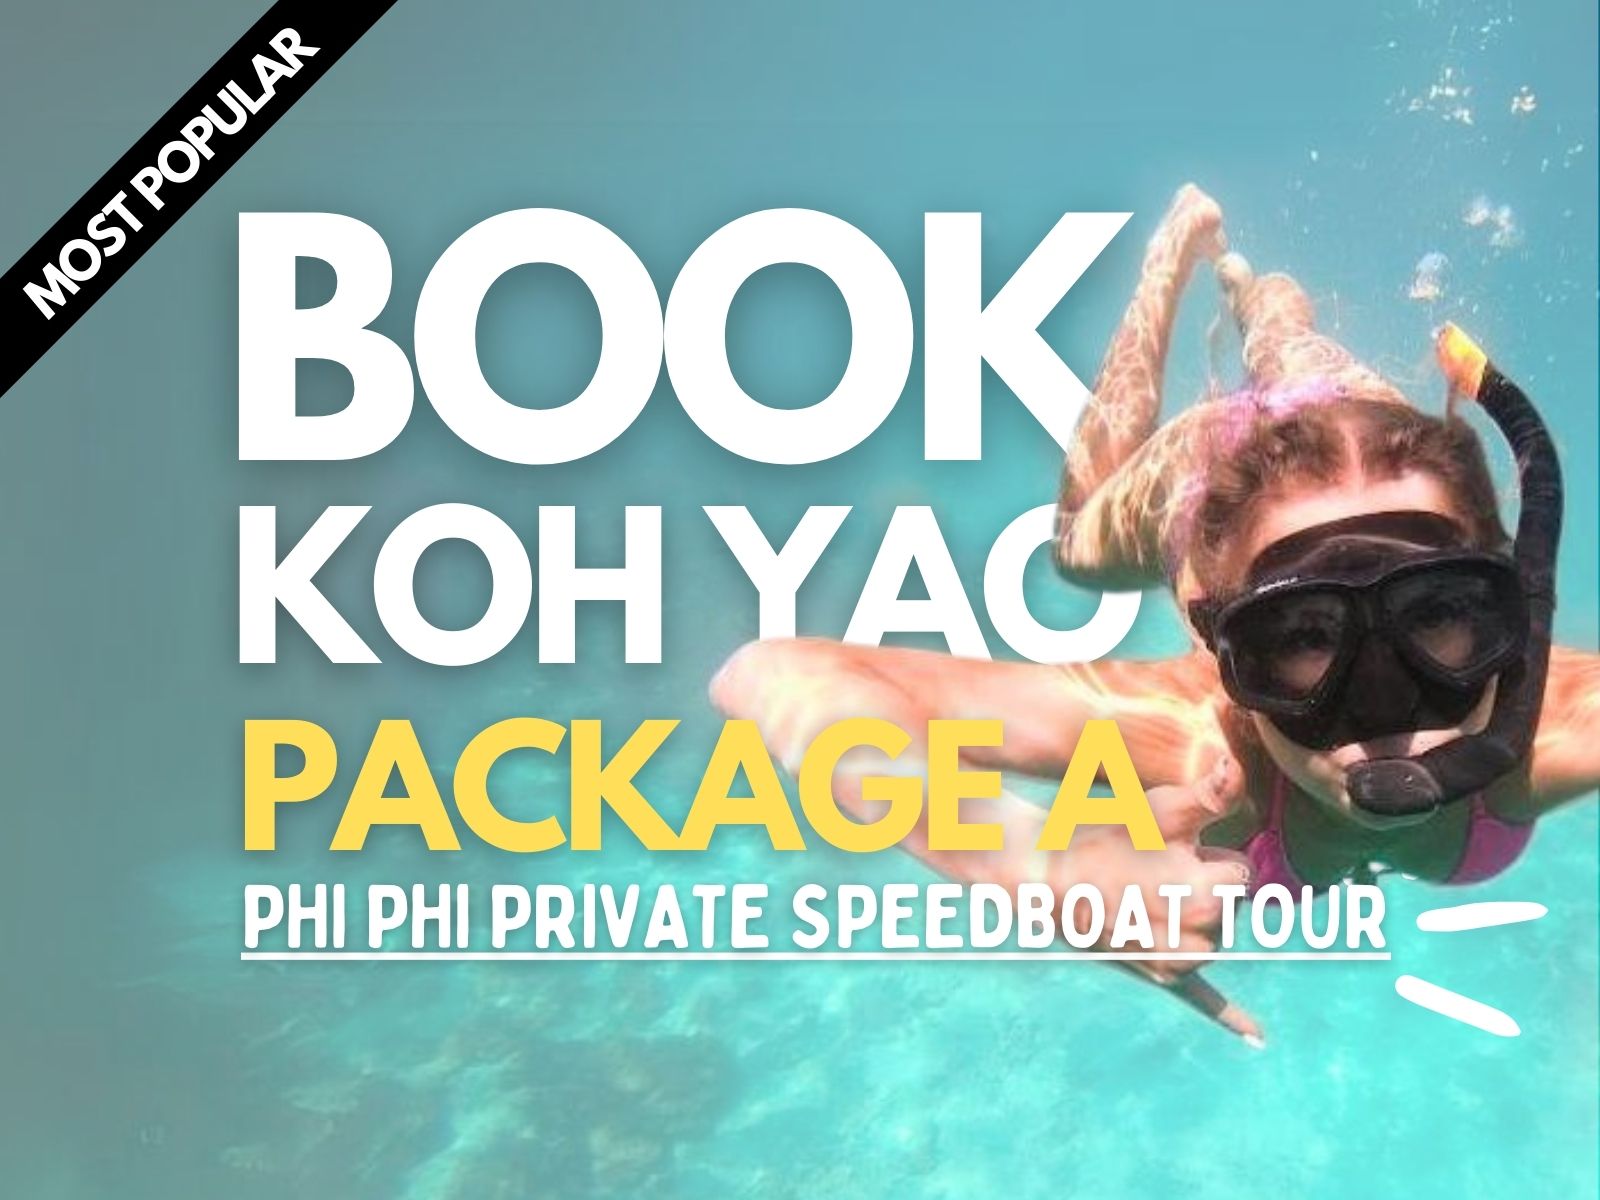 Koh Yao Package A our from Five Star Thailand Phi Phi Isalnd Private Speedboat Charter Tour Starting on Koh Yao Island Yai or Noi Including Private Tour Guide Lunch and Speedboat